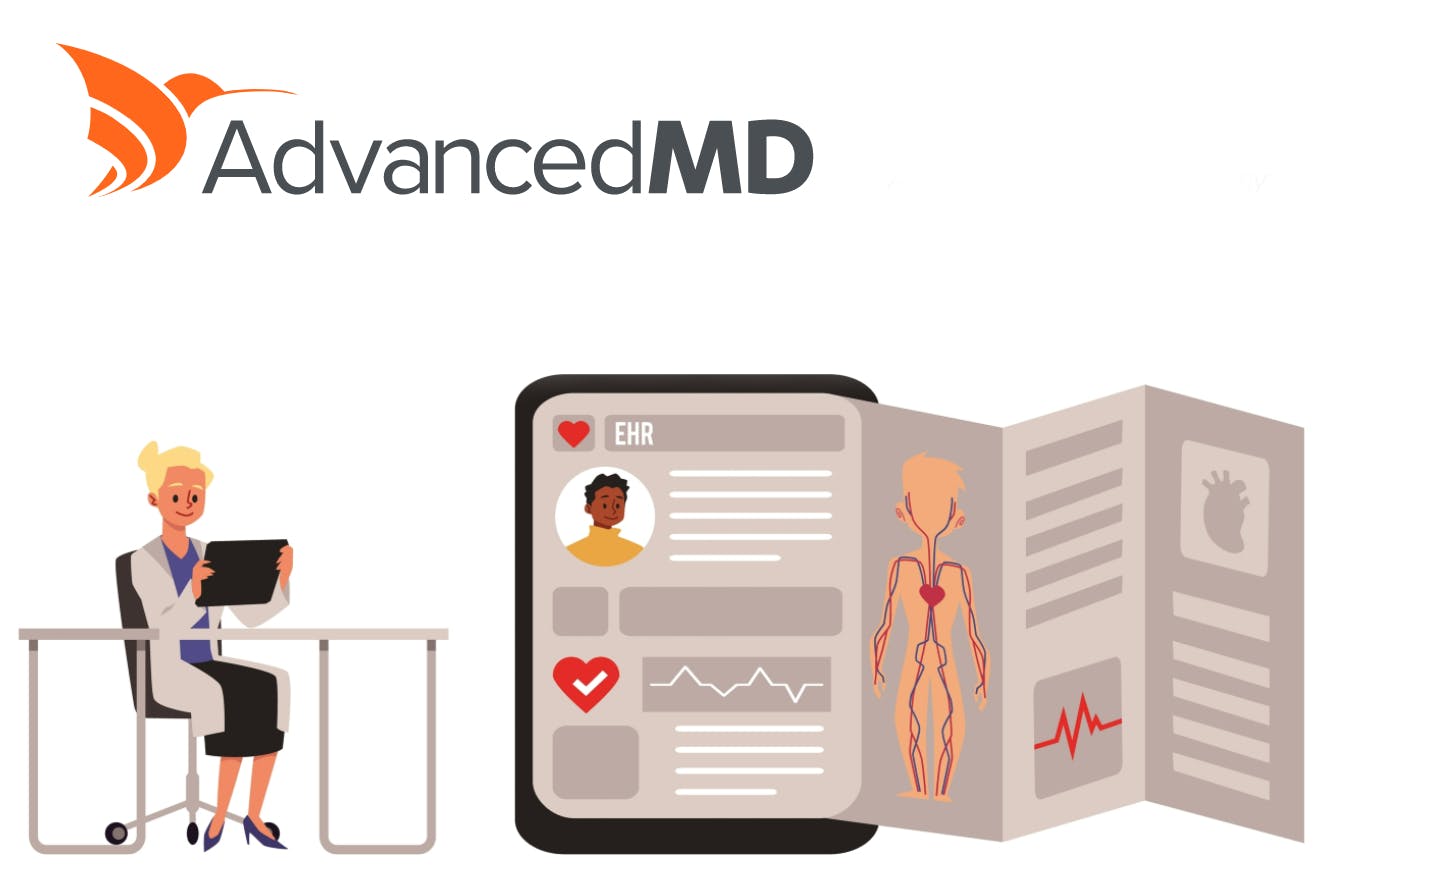 AdvancedMD Medical Software Review: Services, Prices, and Features